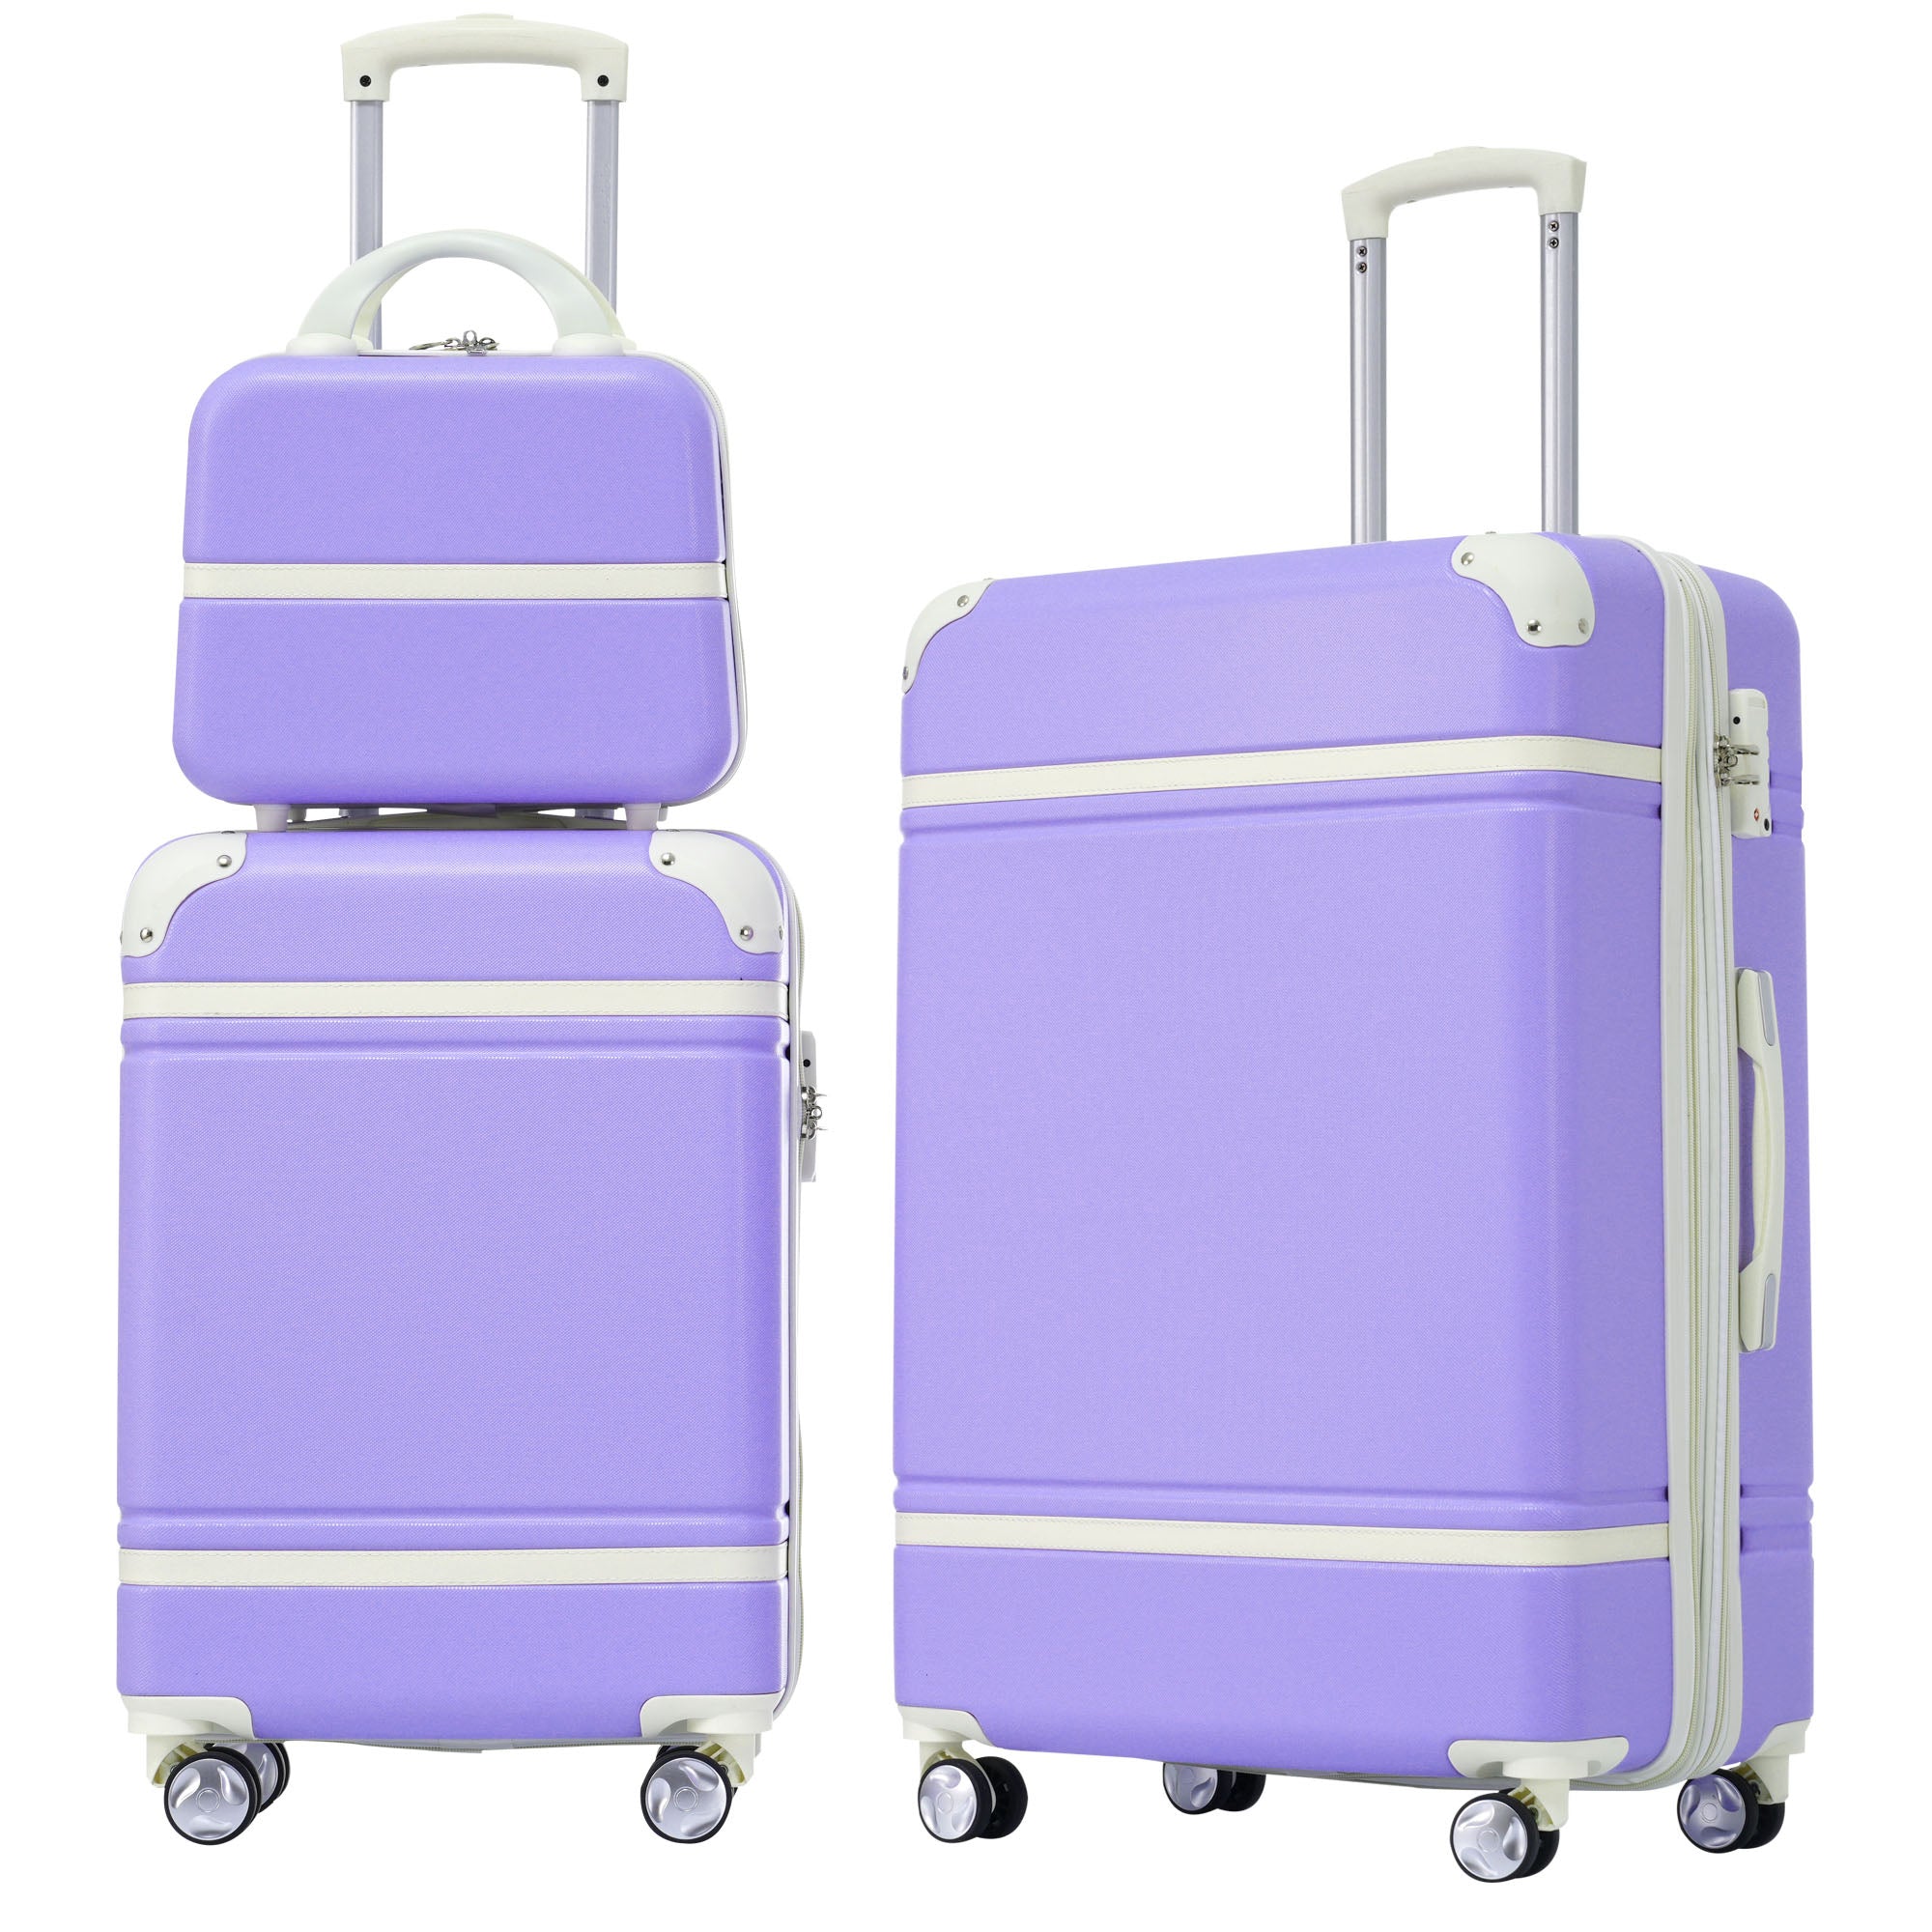 Hardshell Luggage Sets 3 Pieces 20" 24" Luggages and purple-abs